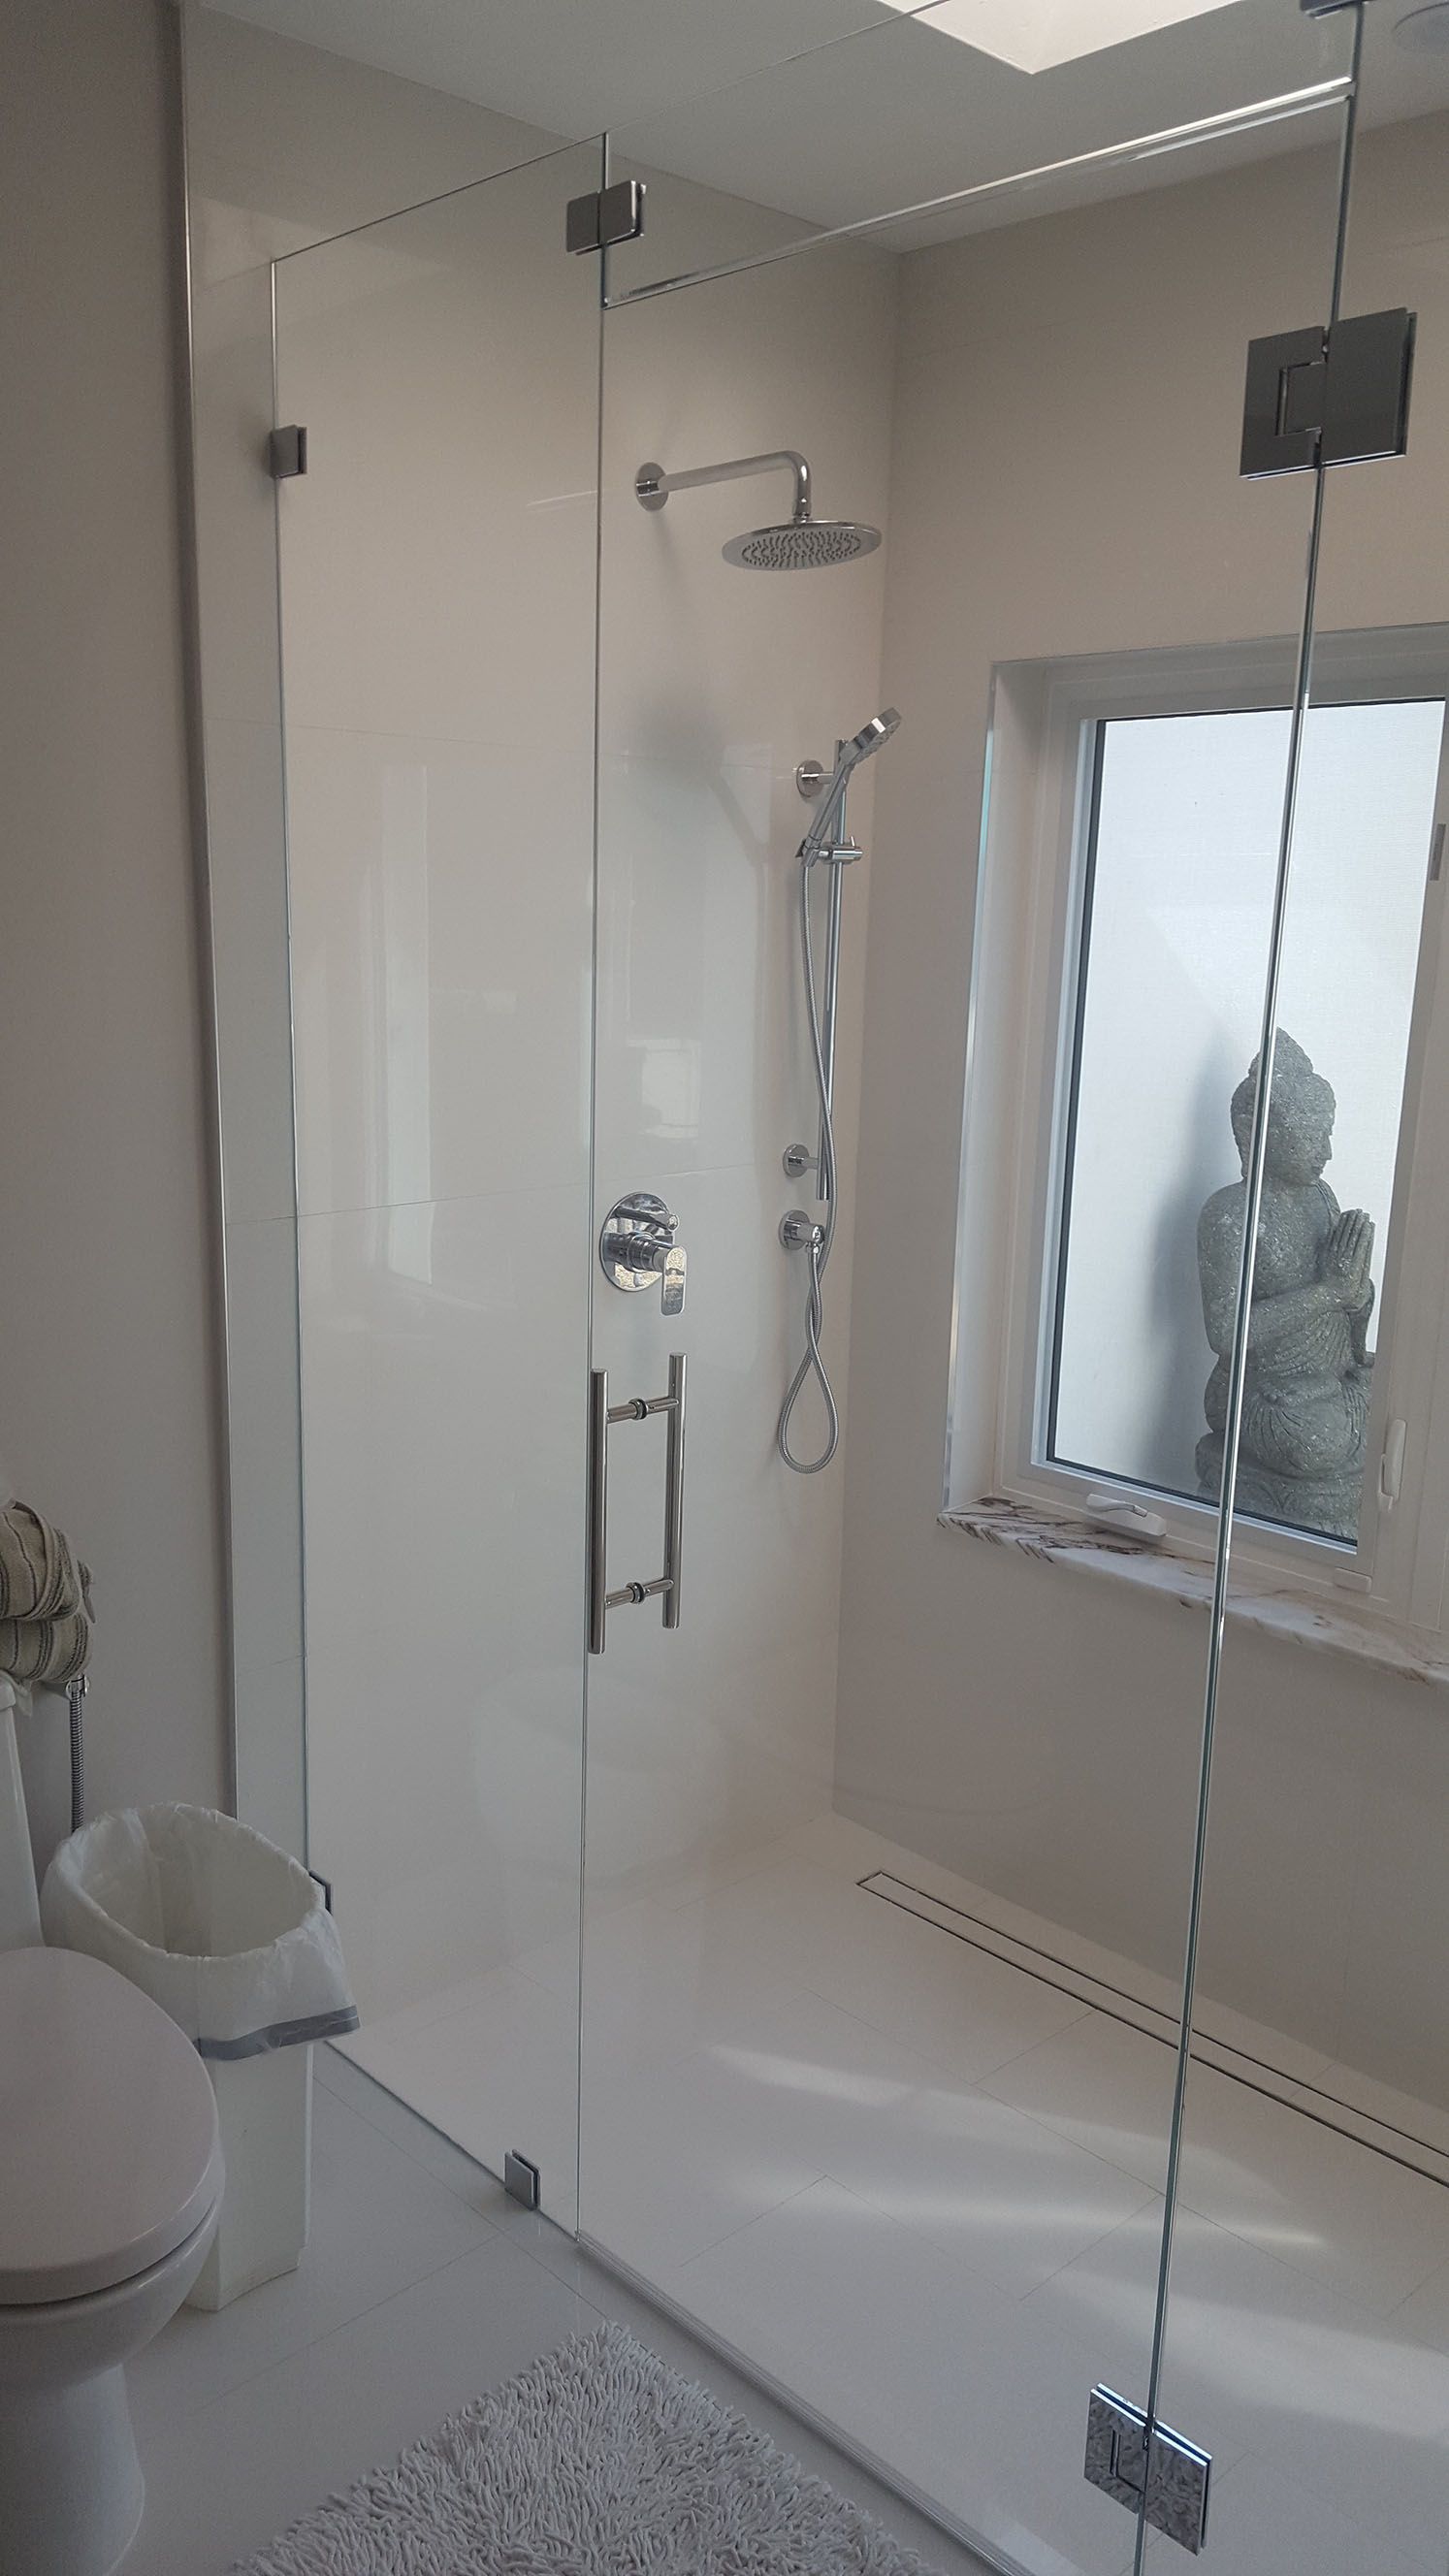 New shower with frameless glass enclosure